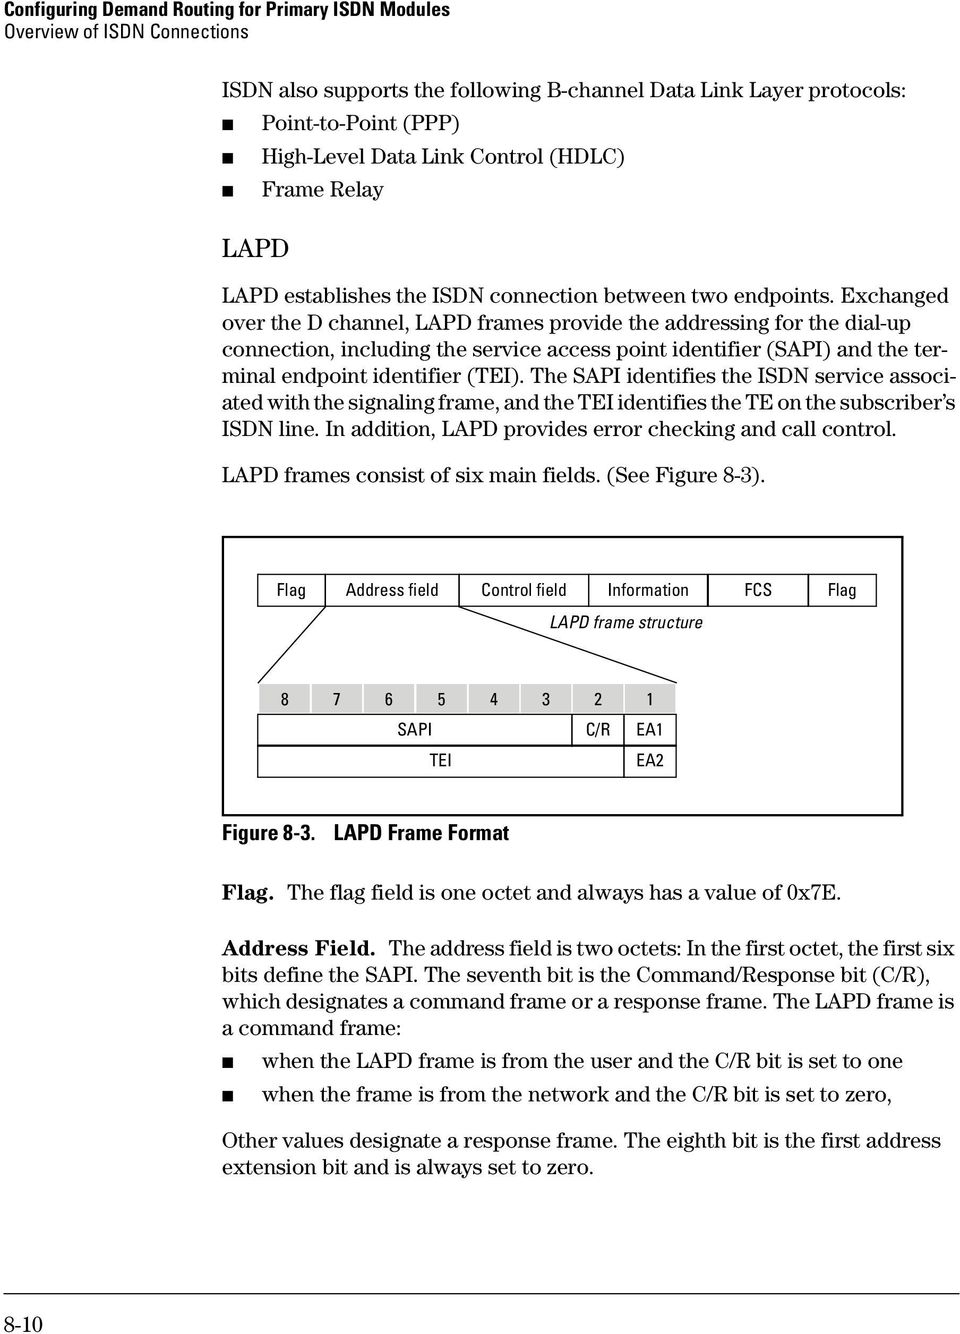 Exchanged over the D channel, LAPD frames provide the addressing for the dial-up connection, including the service access point identifier (SAPI) and the terminal endpoint identifier (TEI).